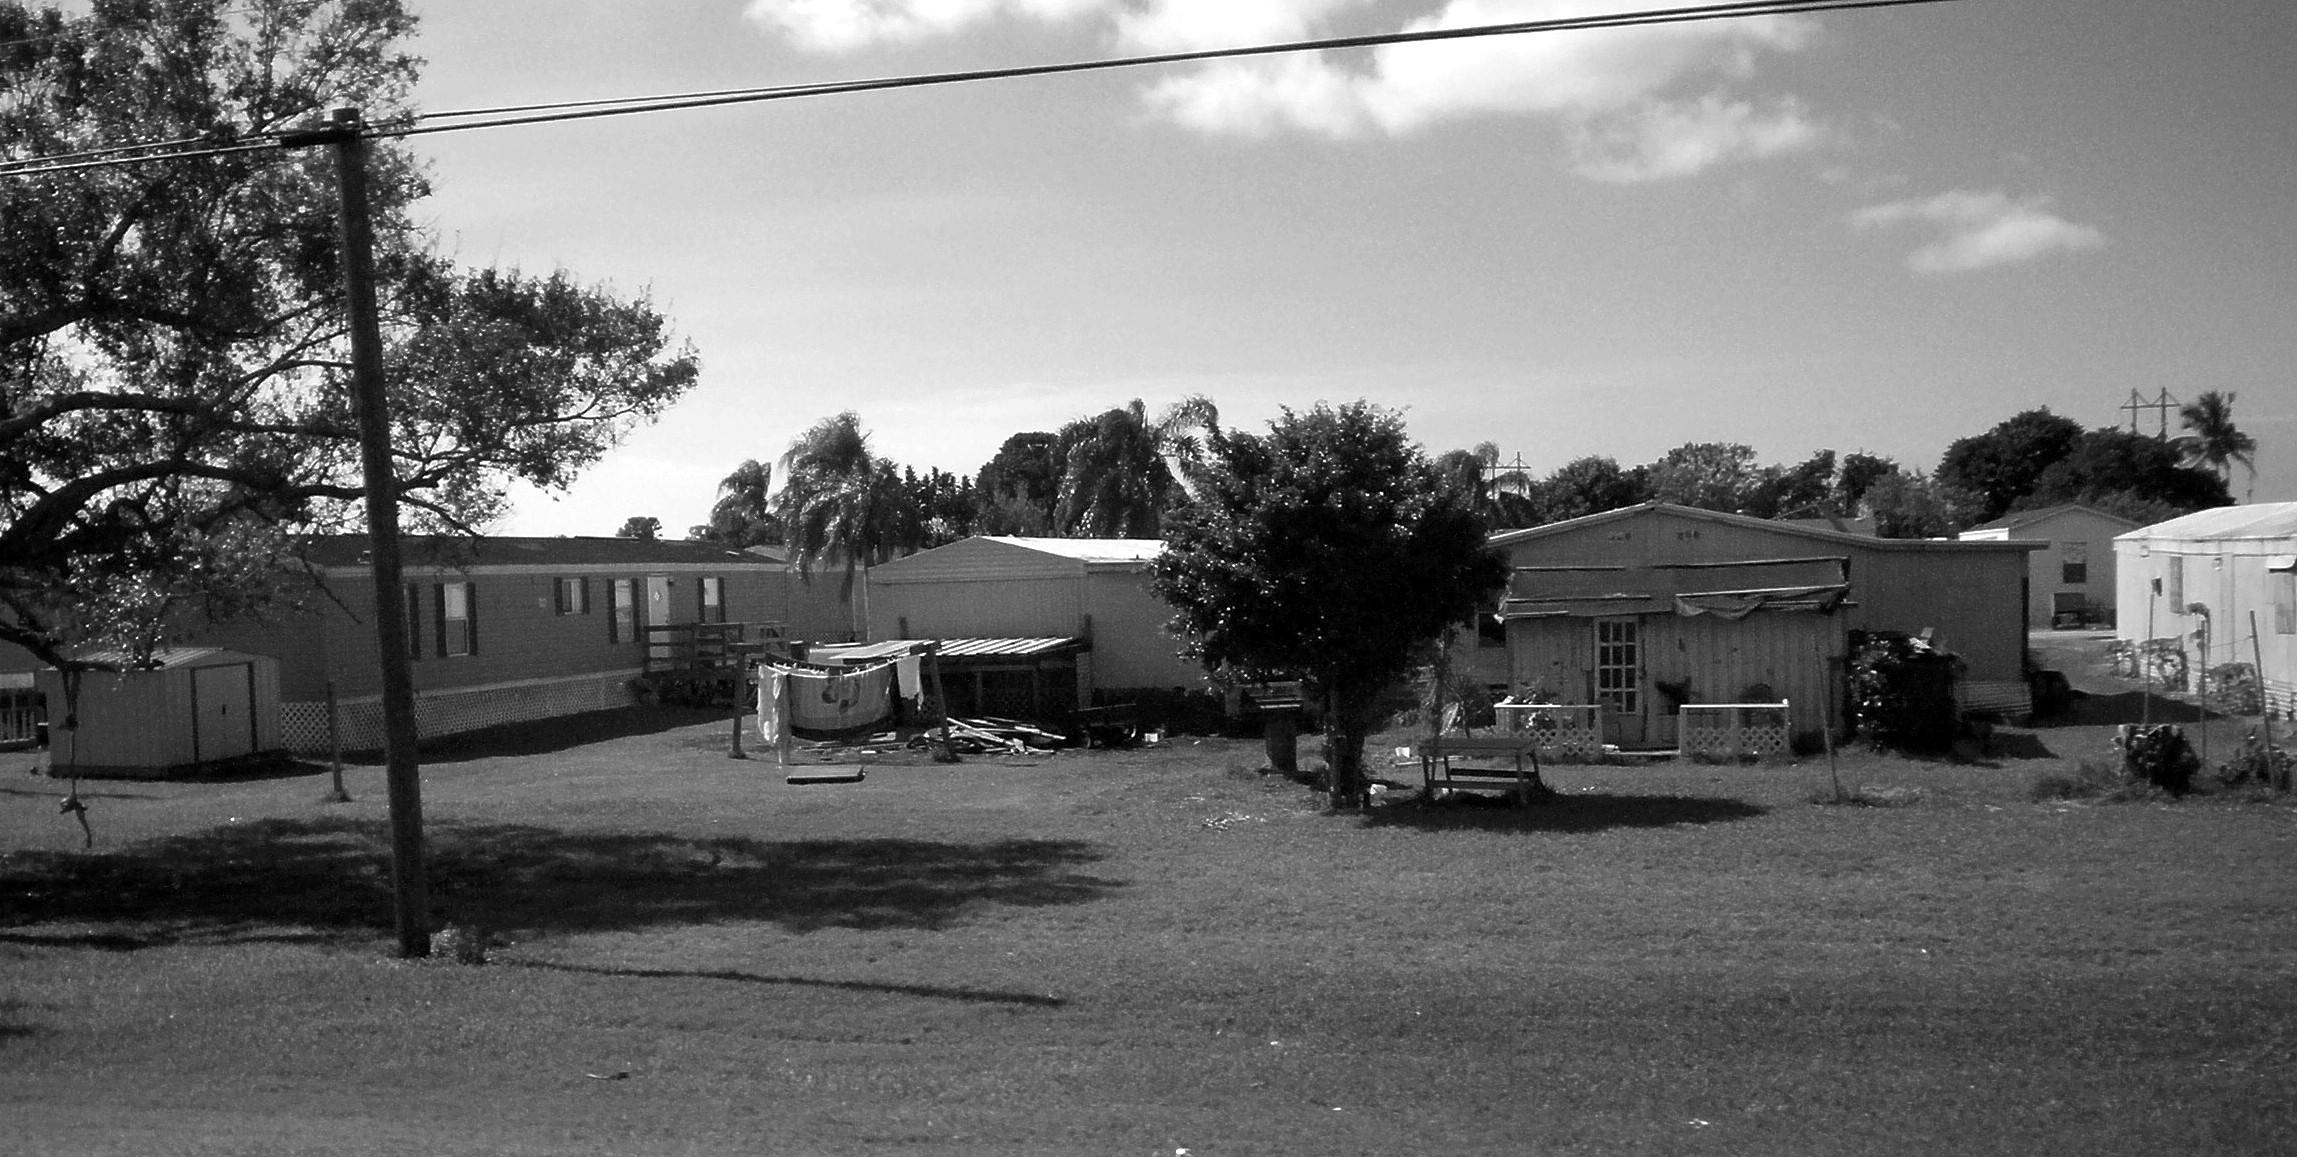 Free stock photo of monochrome photography, trailer park, urban decay